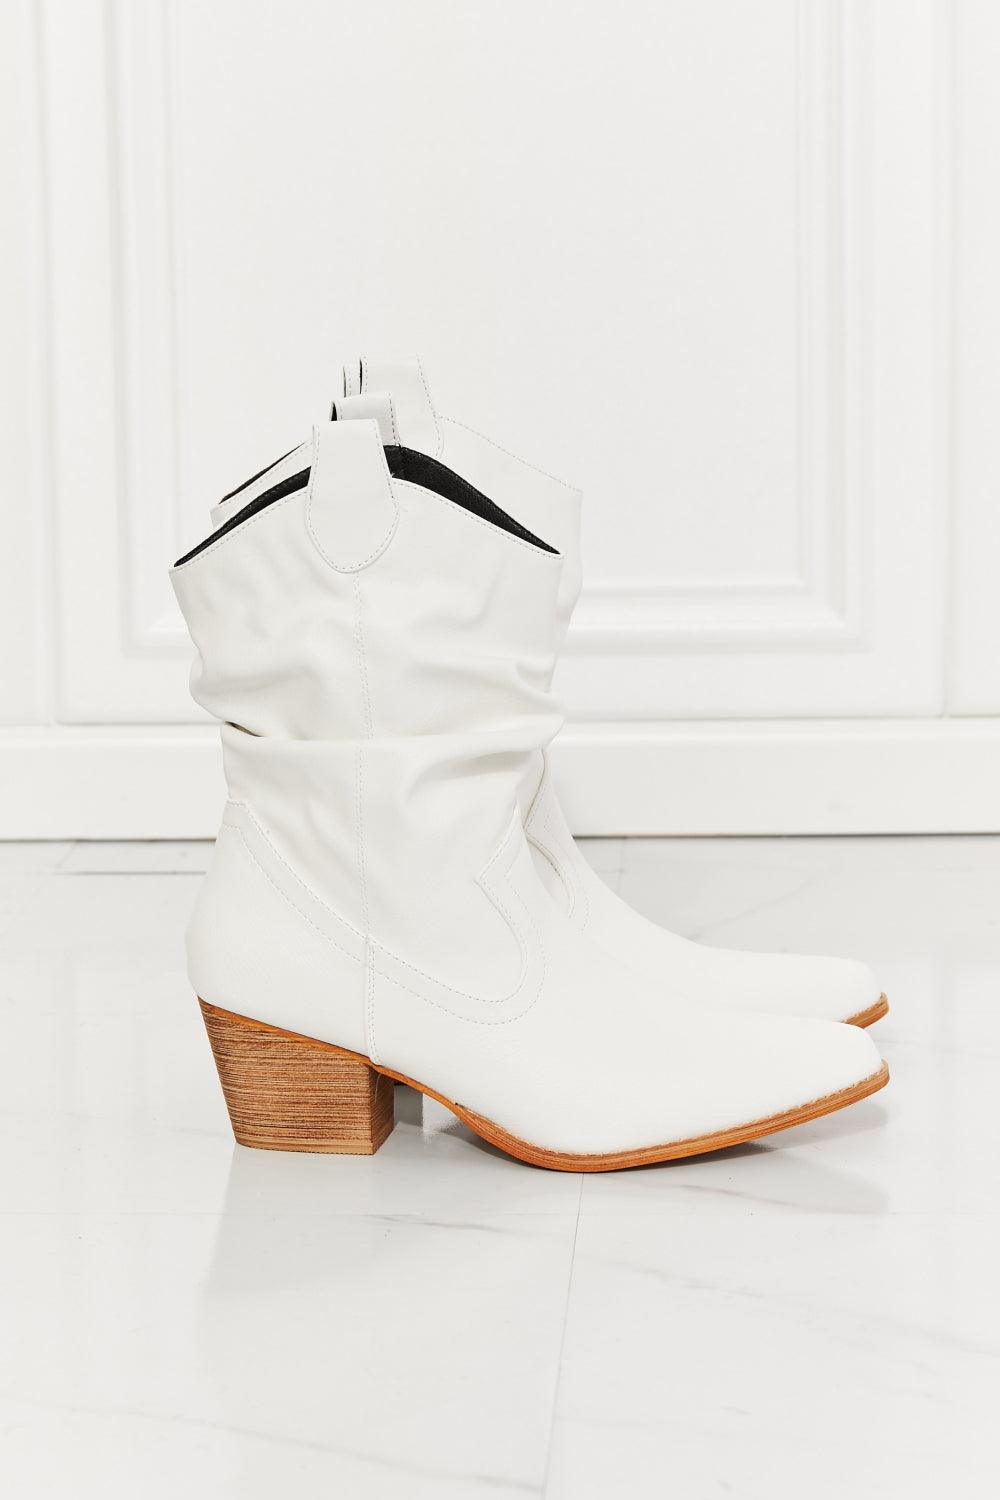 MMShoes Better in Texas Scrunch Cowboy Boots in White - The Fiery Jasmine